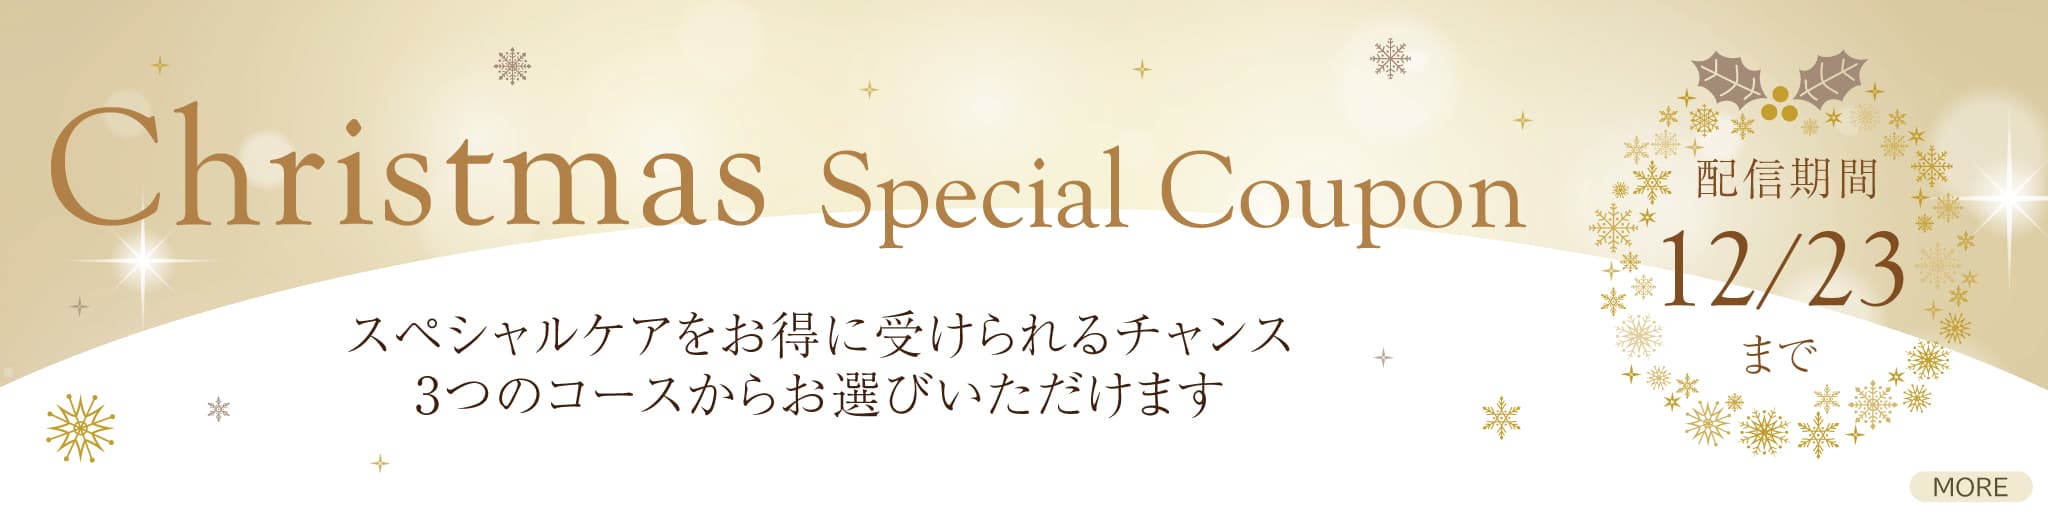 Christmas Special Coupon